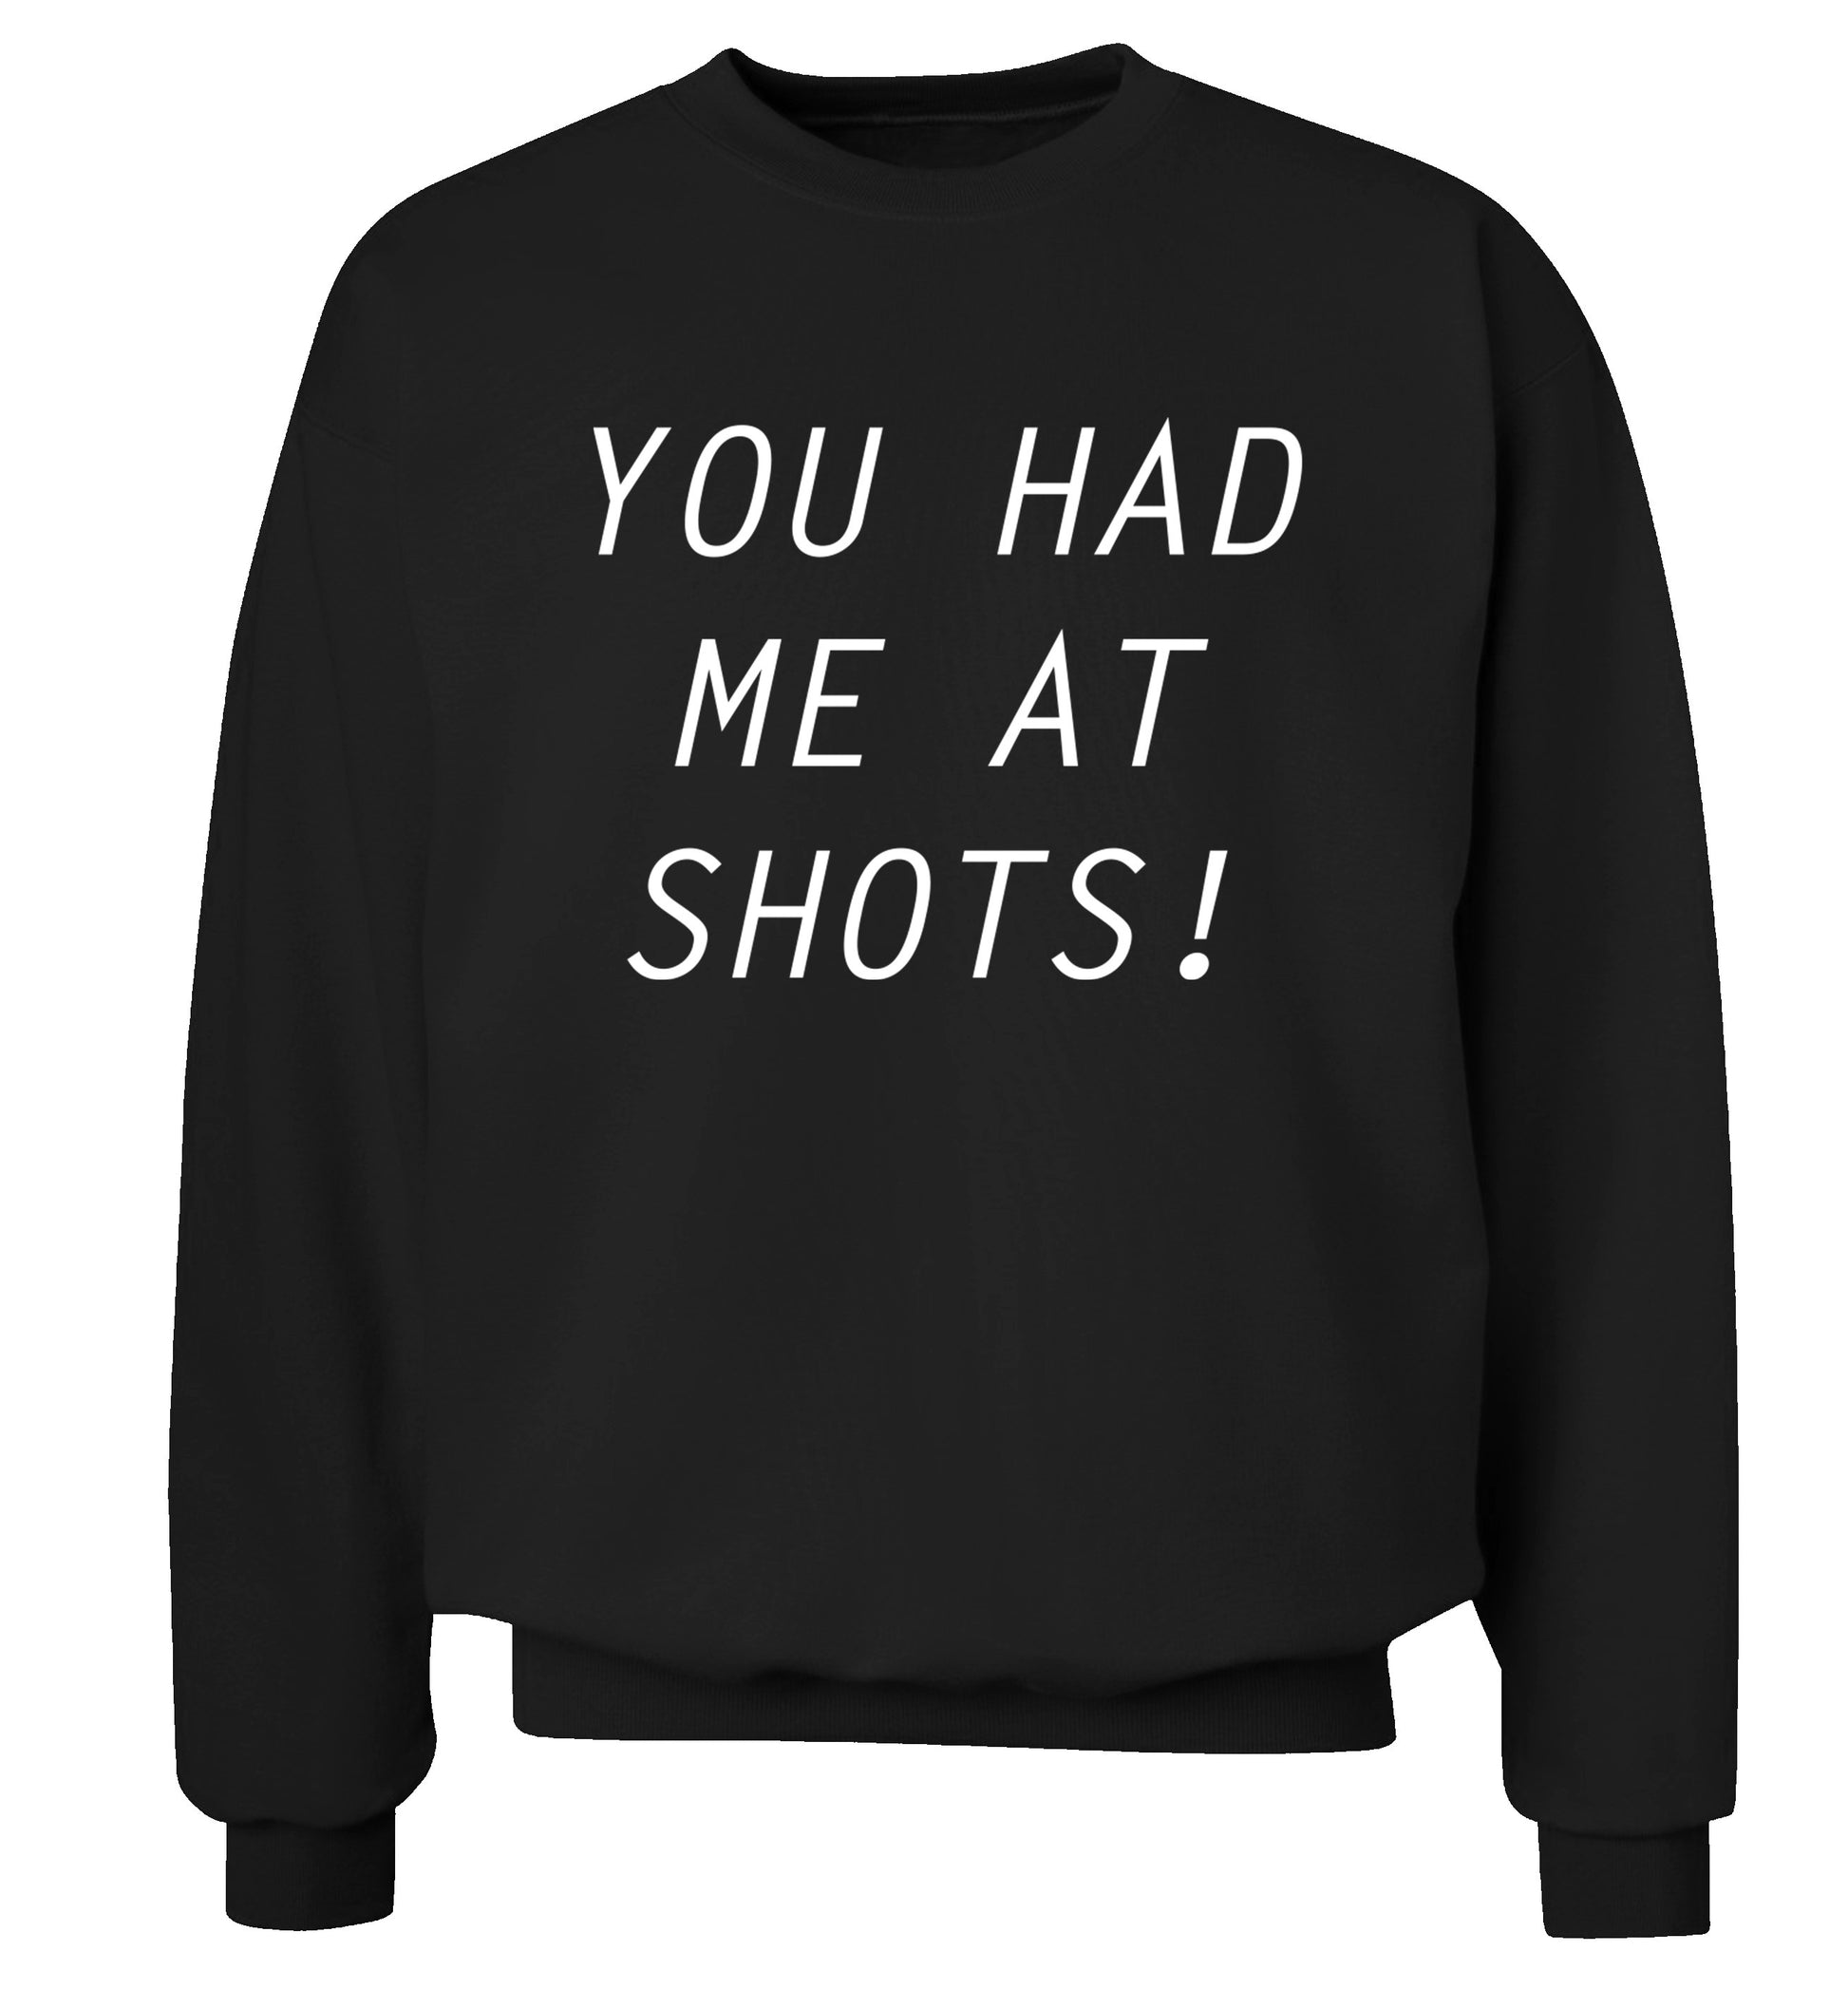 You had me at shots Adult's unisex black Sweater 2XL